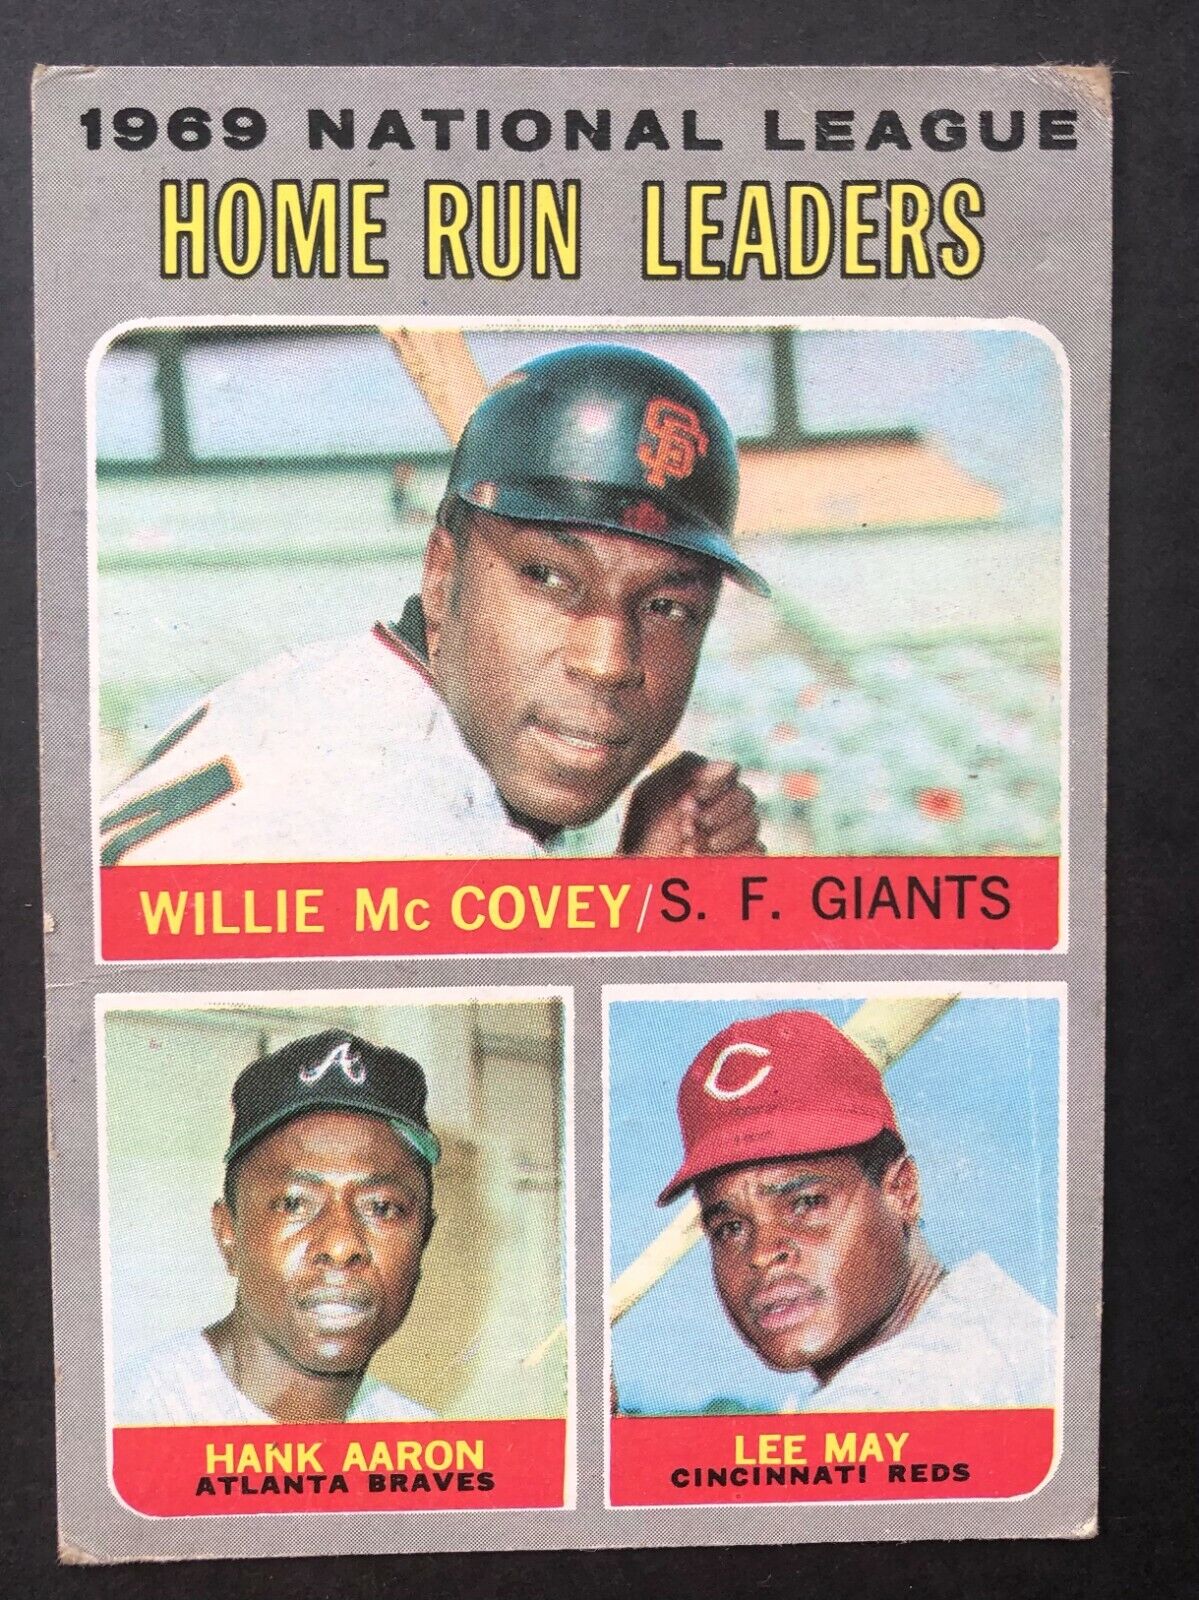 1970 Topps Home Run Leaders Card #65. Willie McCovey / Hank Aaron / Lee May